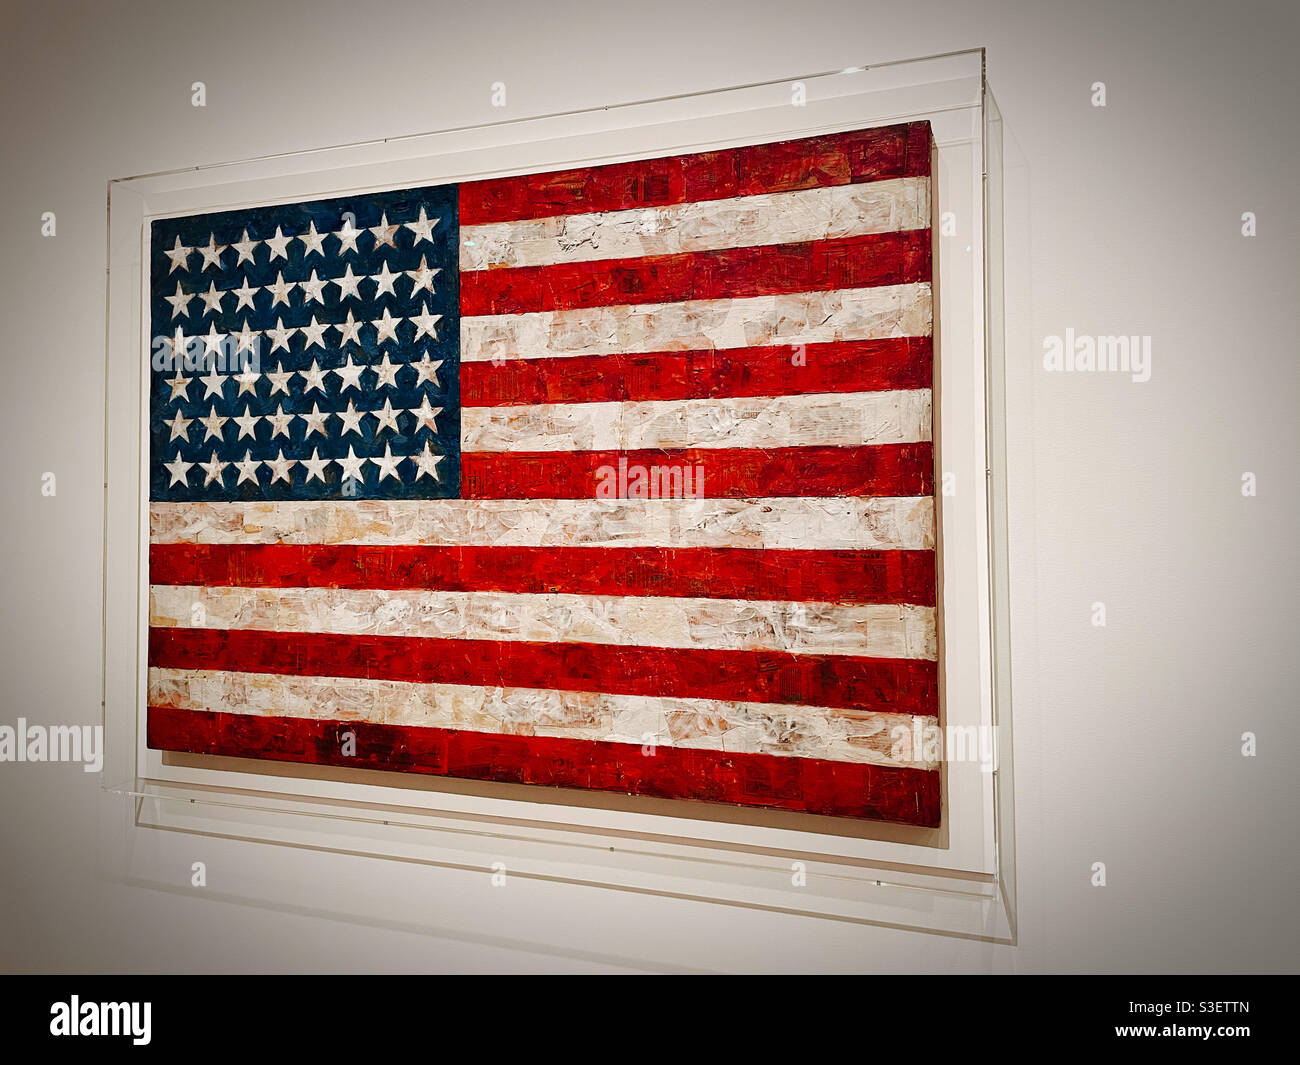 Jasper Johns American flag painting on display at the Museum of modern Art, NYC, USA Stock Photo